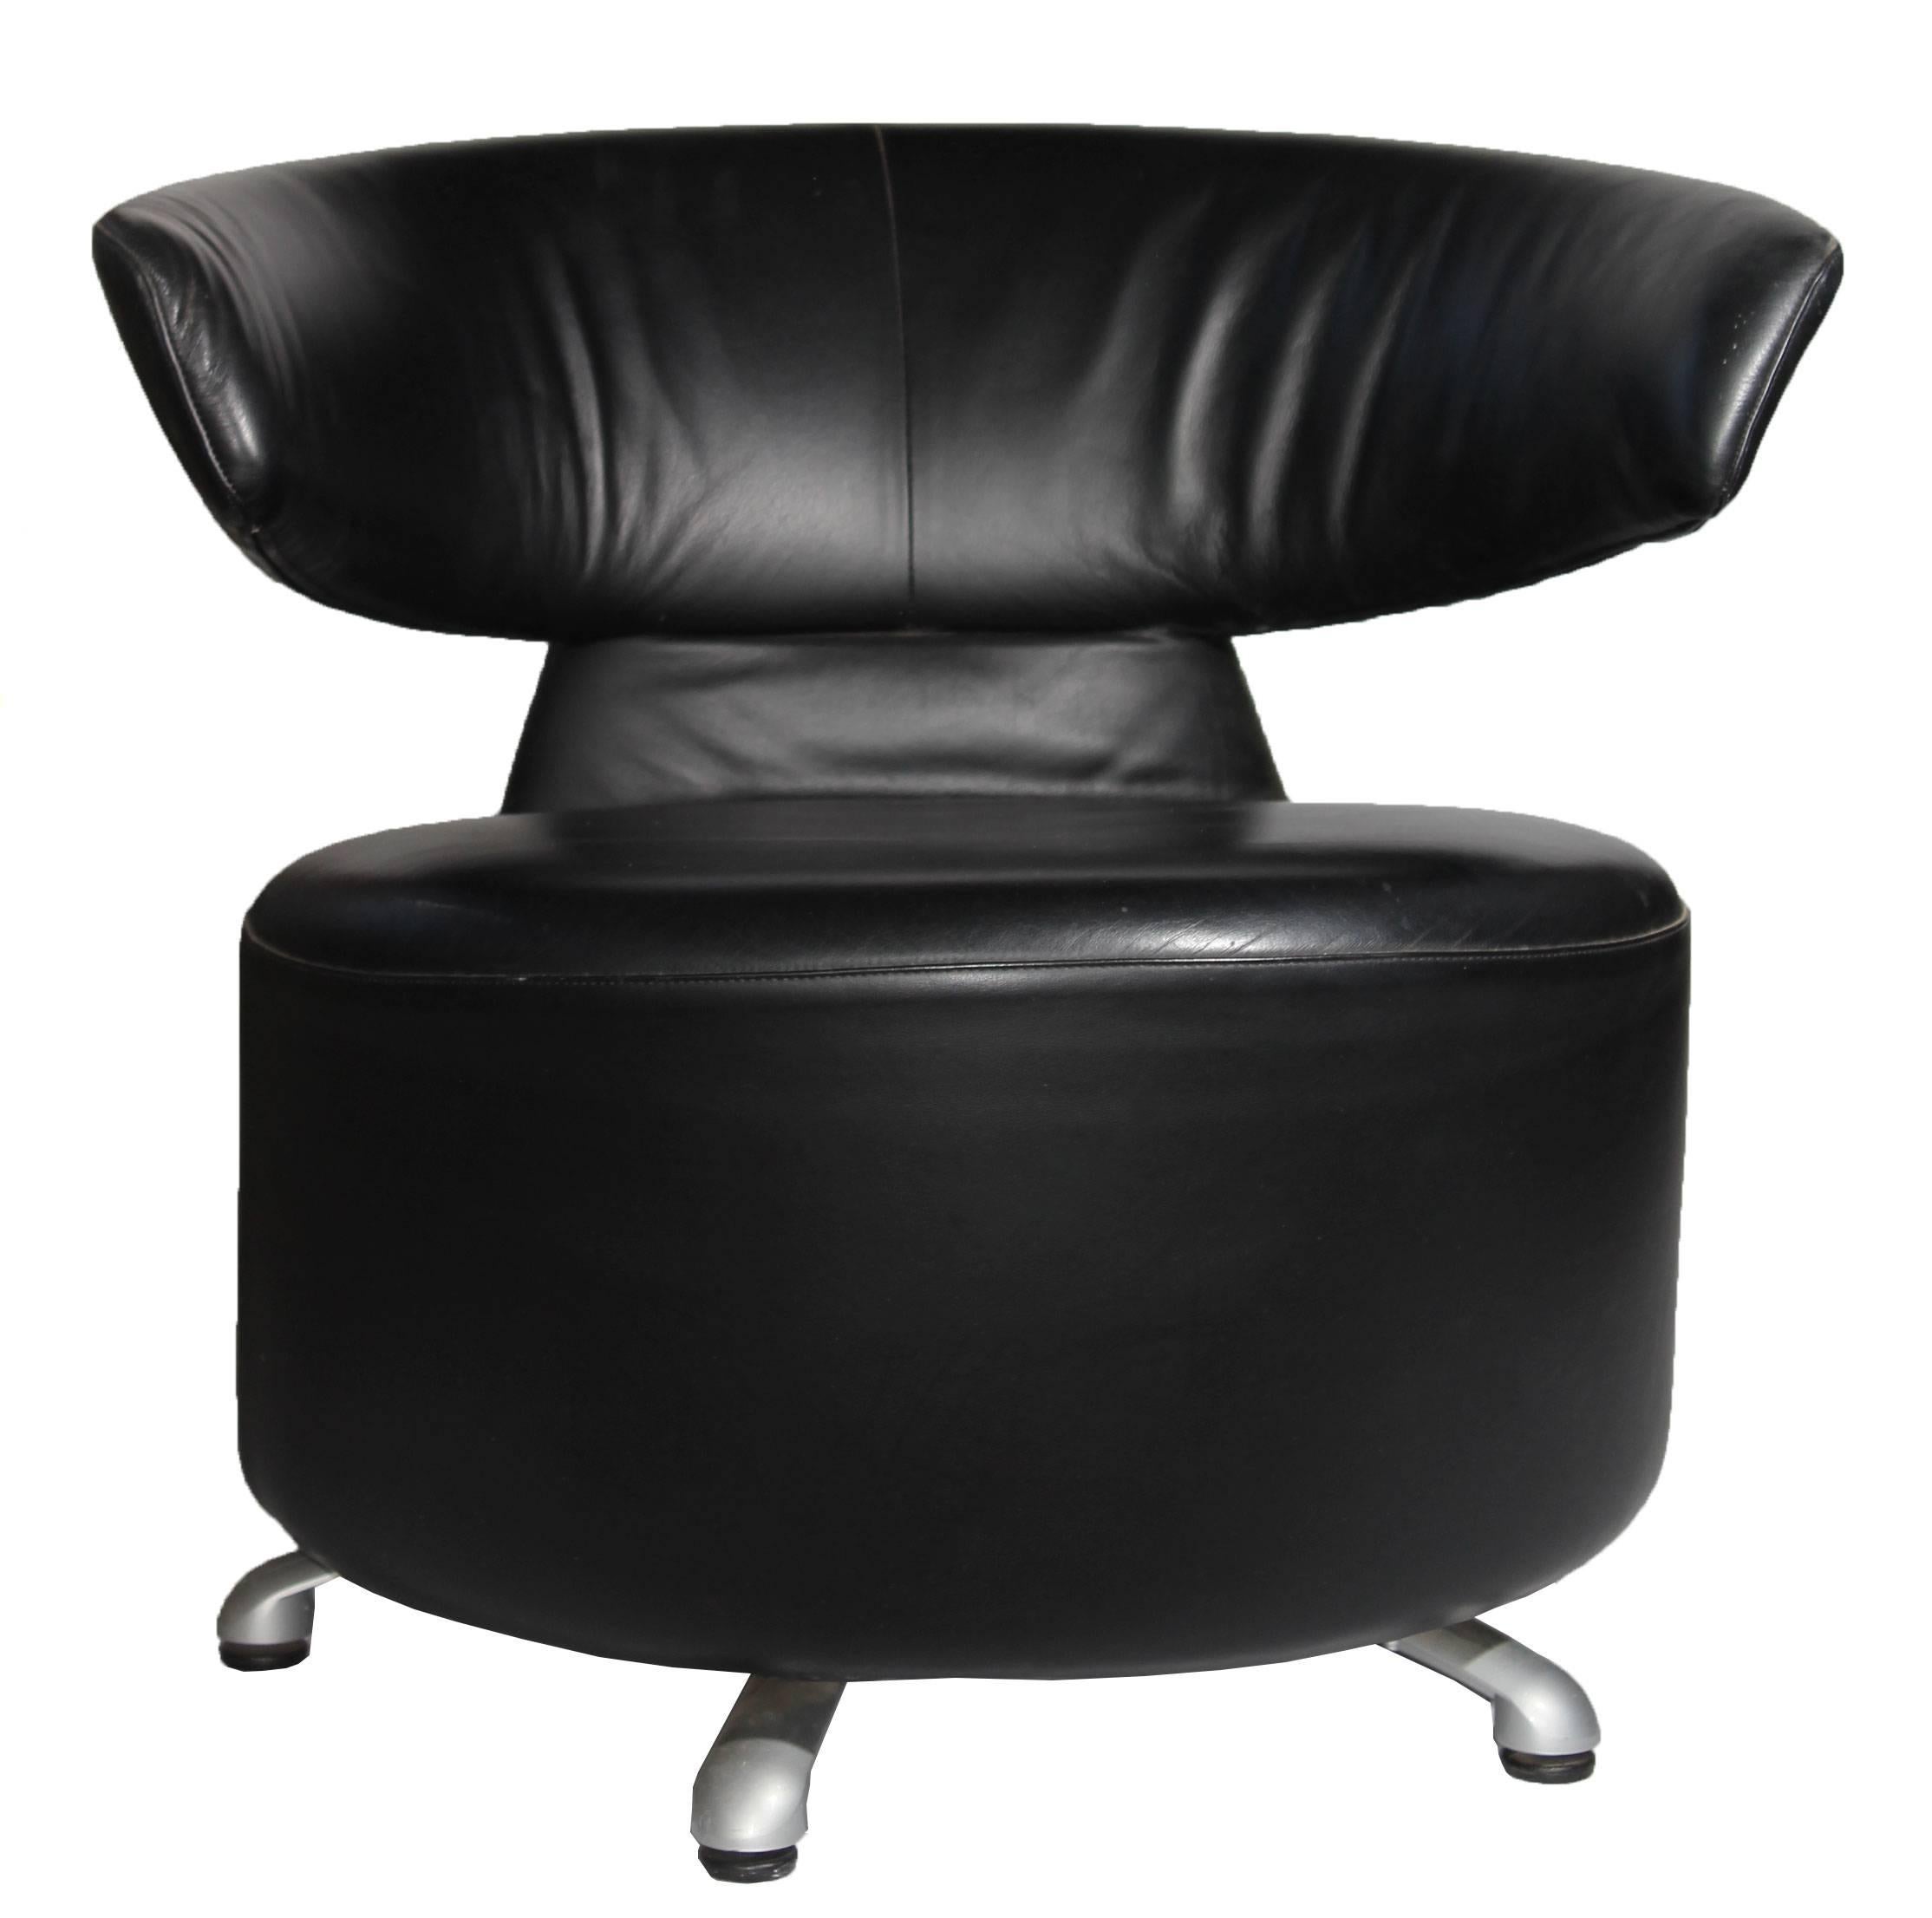 Black leather swivel backrest with armrests (biki) on a fixed steel base designed by Toshiyuki Kita for Cassina in 2000. Moulded CFC-free polyurethane foam and polyester wadding and removable leather covers.

 